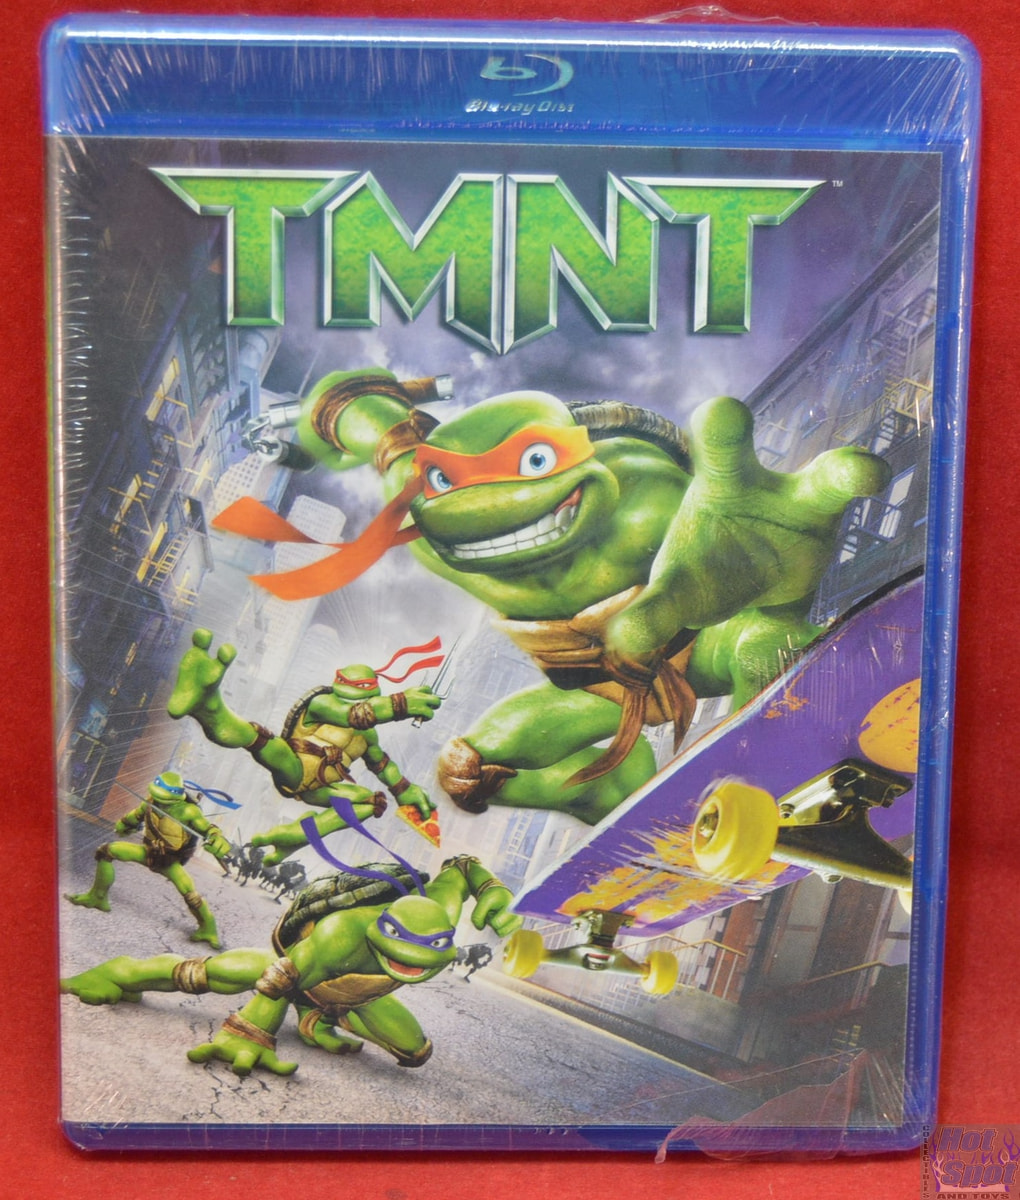 Hot Spot Collectibles and Toys - TMNT Animated 2007 Movie on DVD